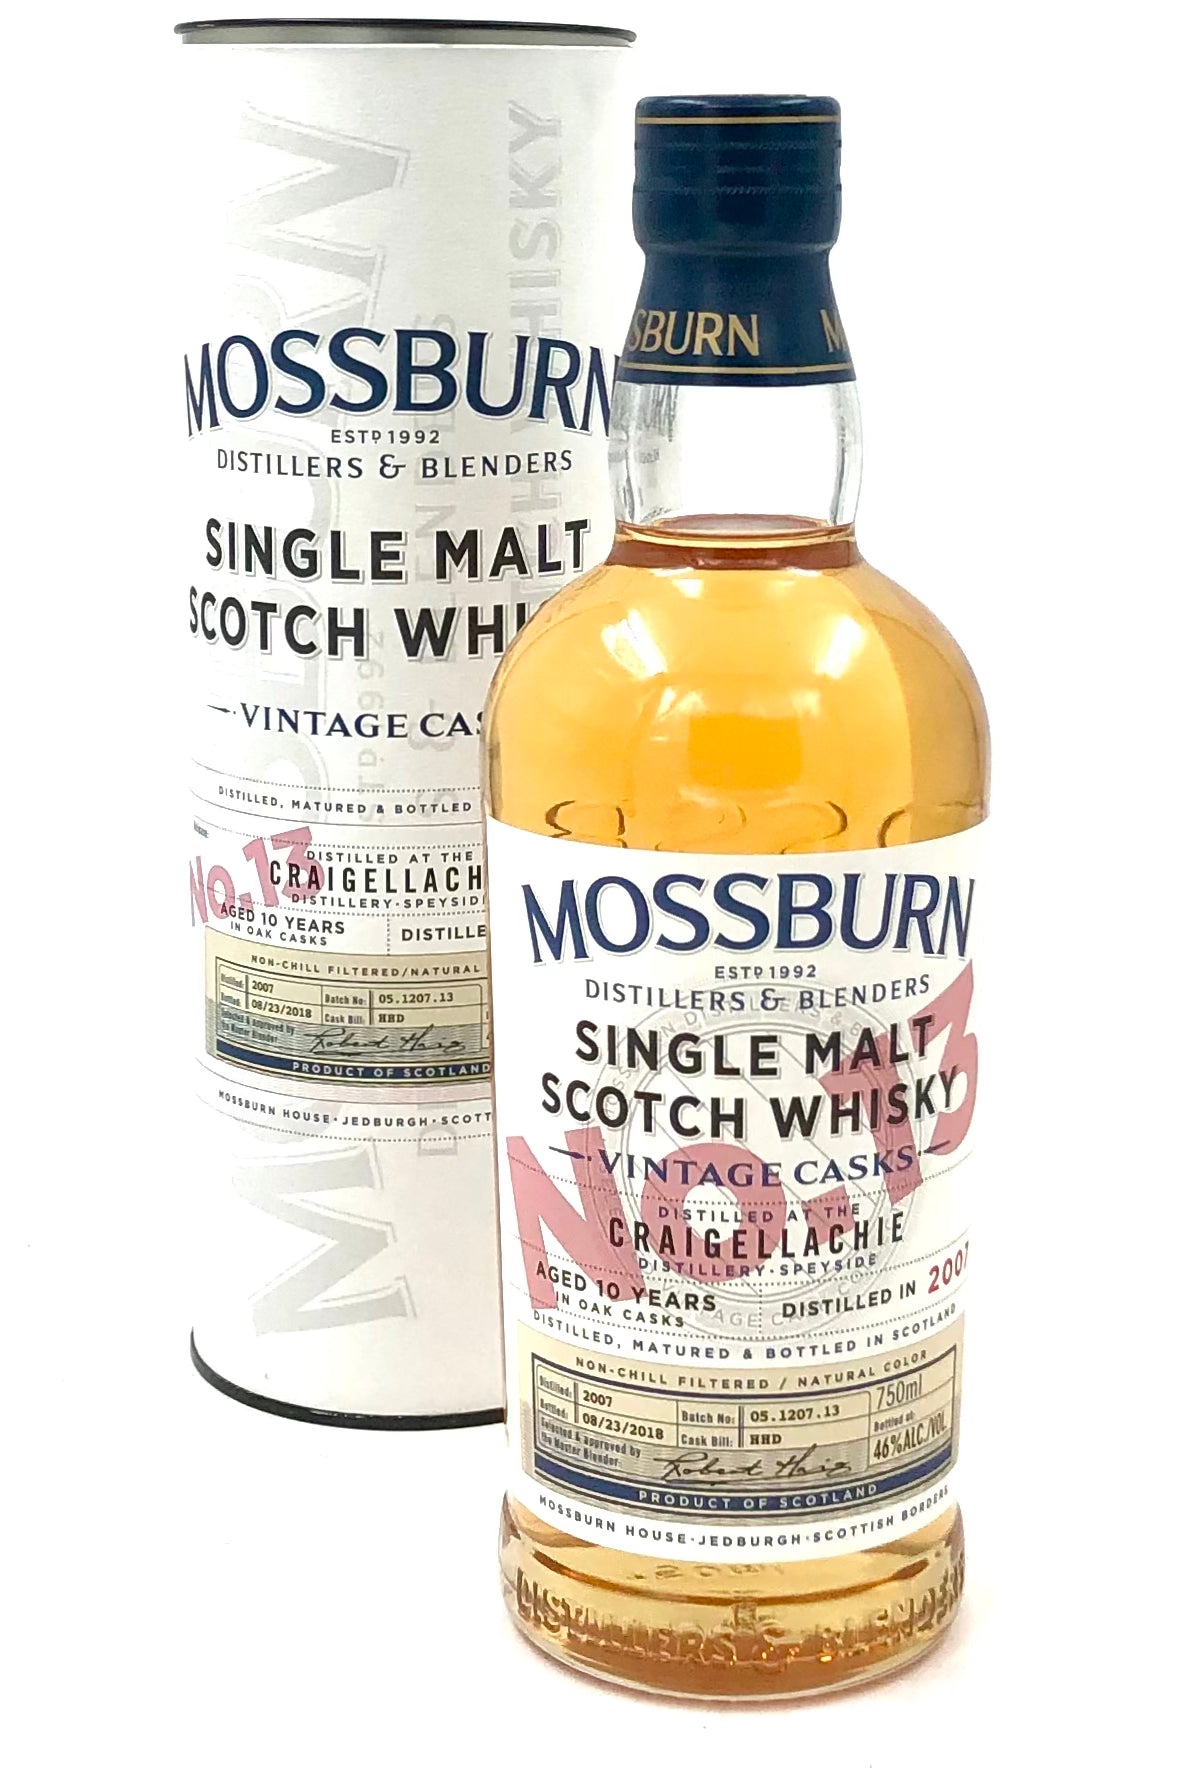 Craigellachie 10 Years Old No. 13 Scotch Whisky by Mossburn Distillers